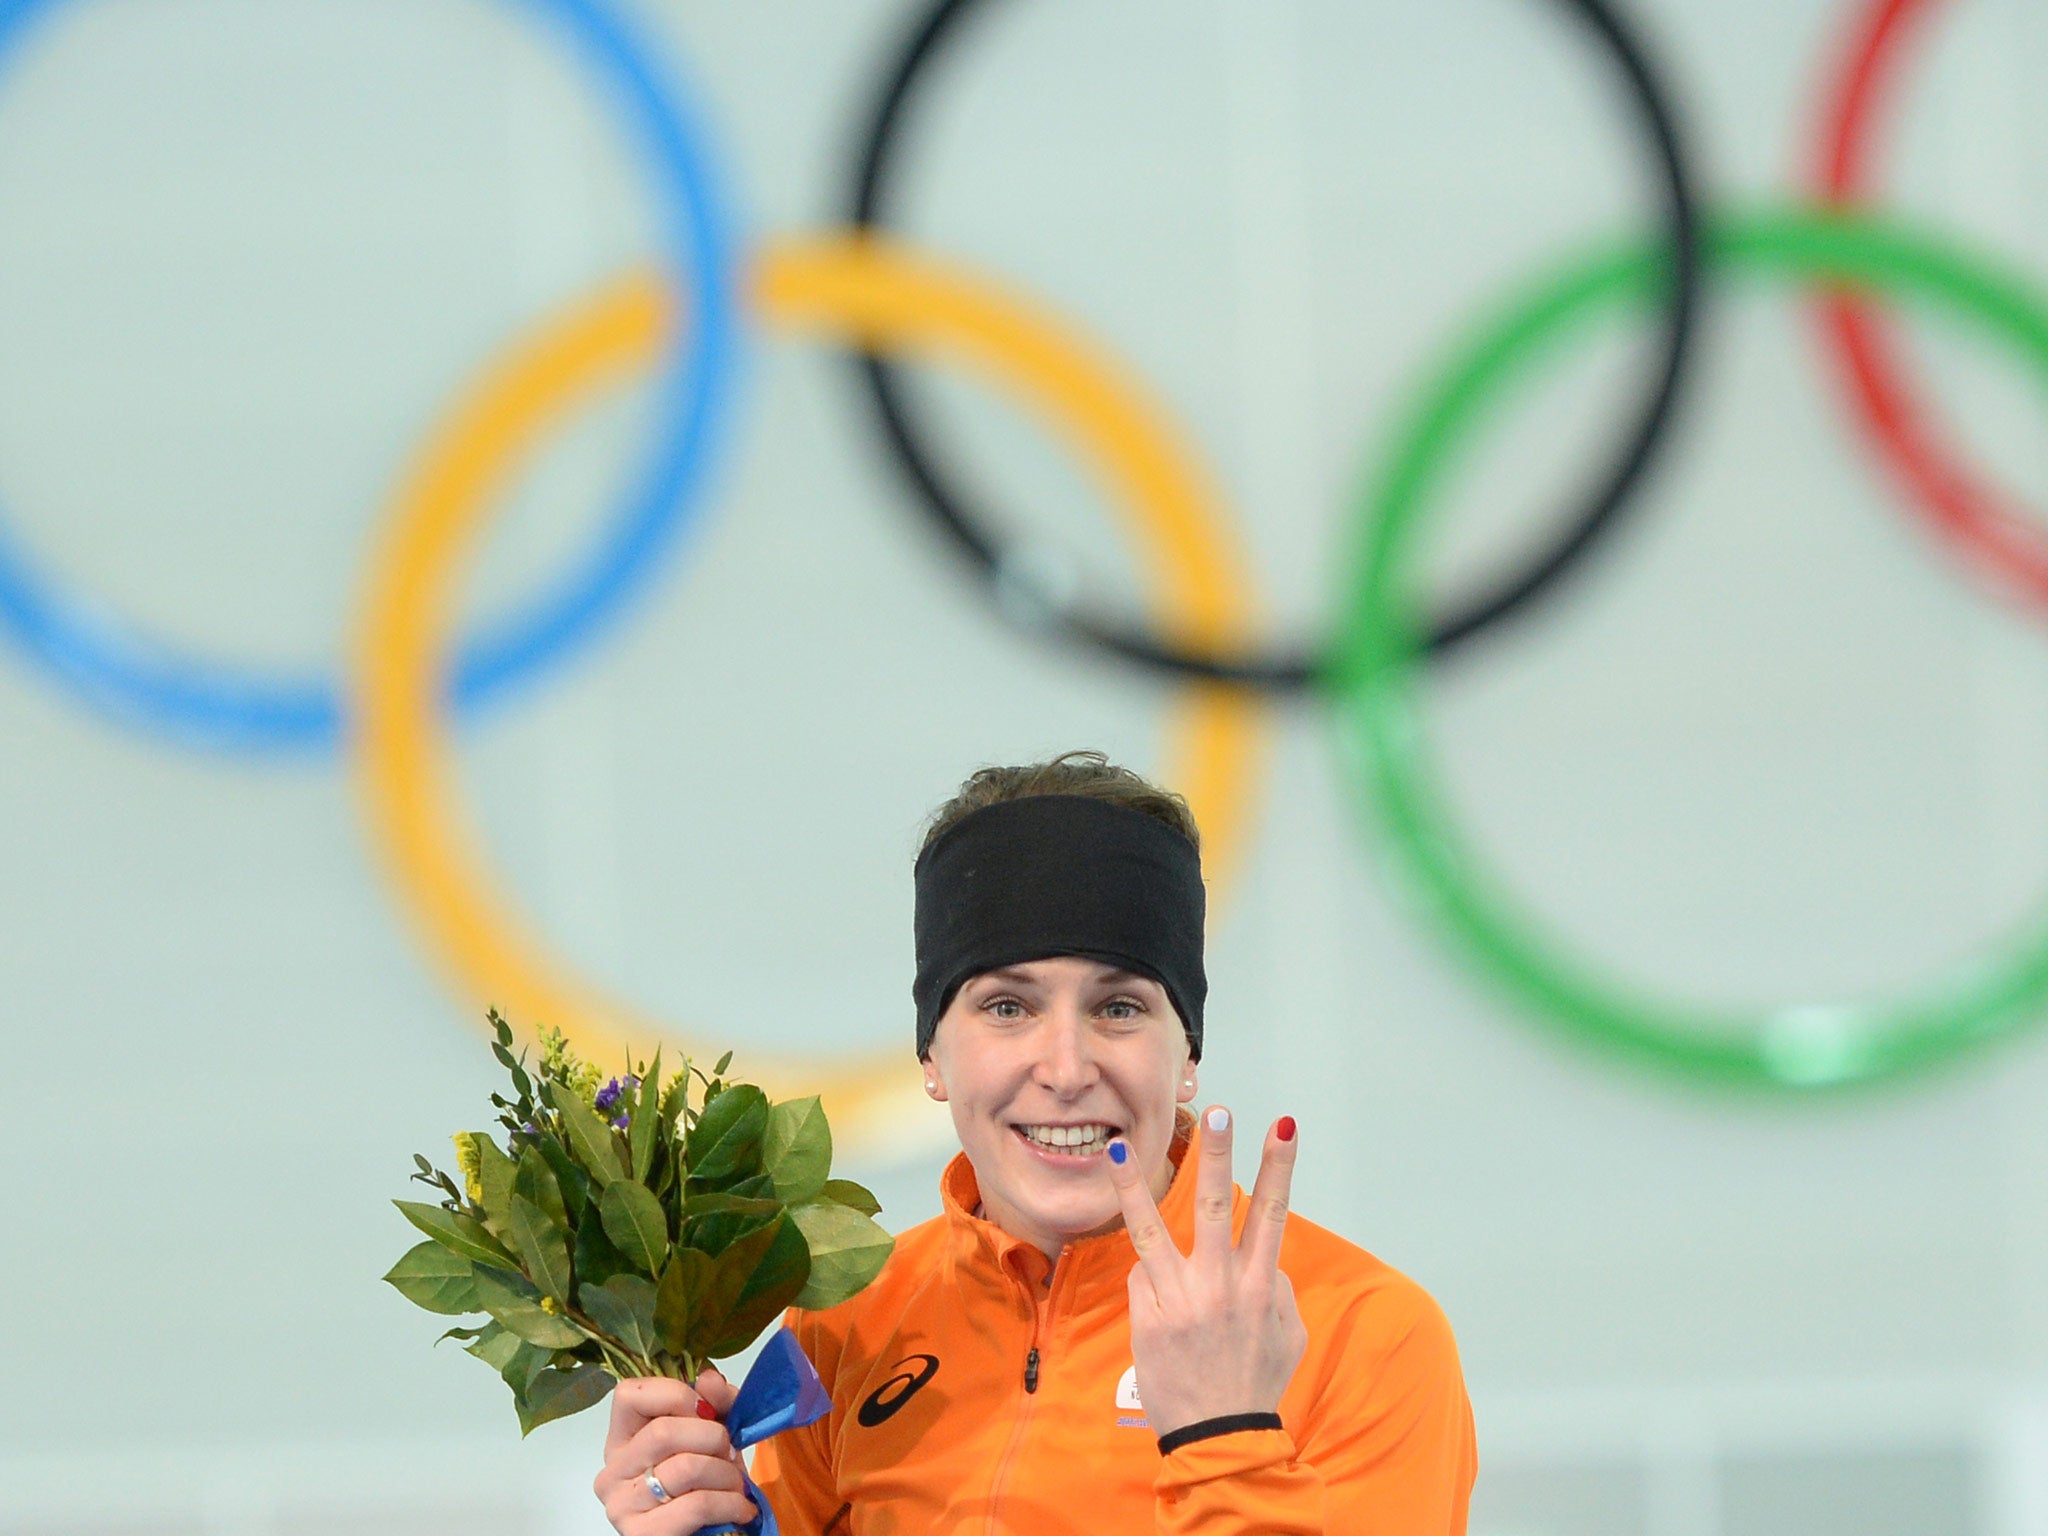 Ireen Wust becomes the first openly gay athlete to win gold in Sochi